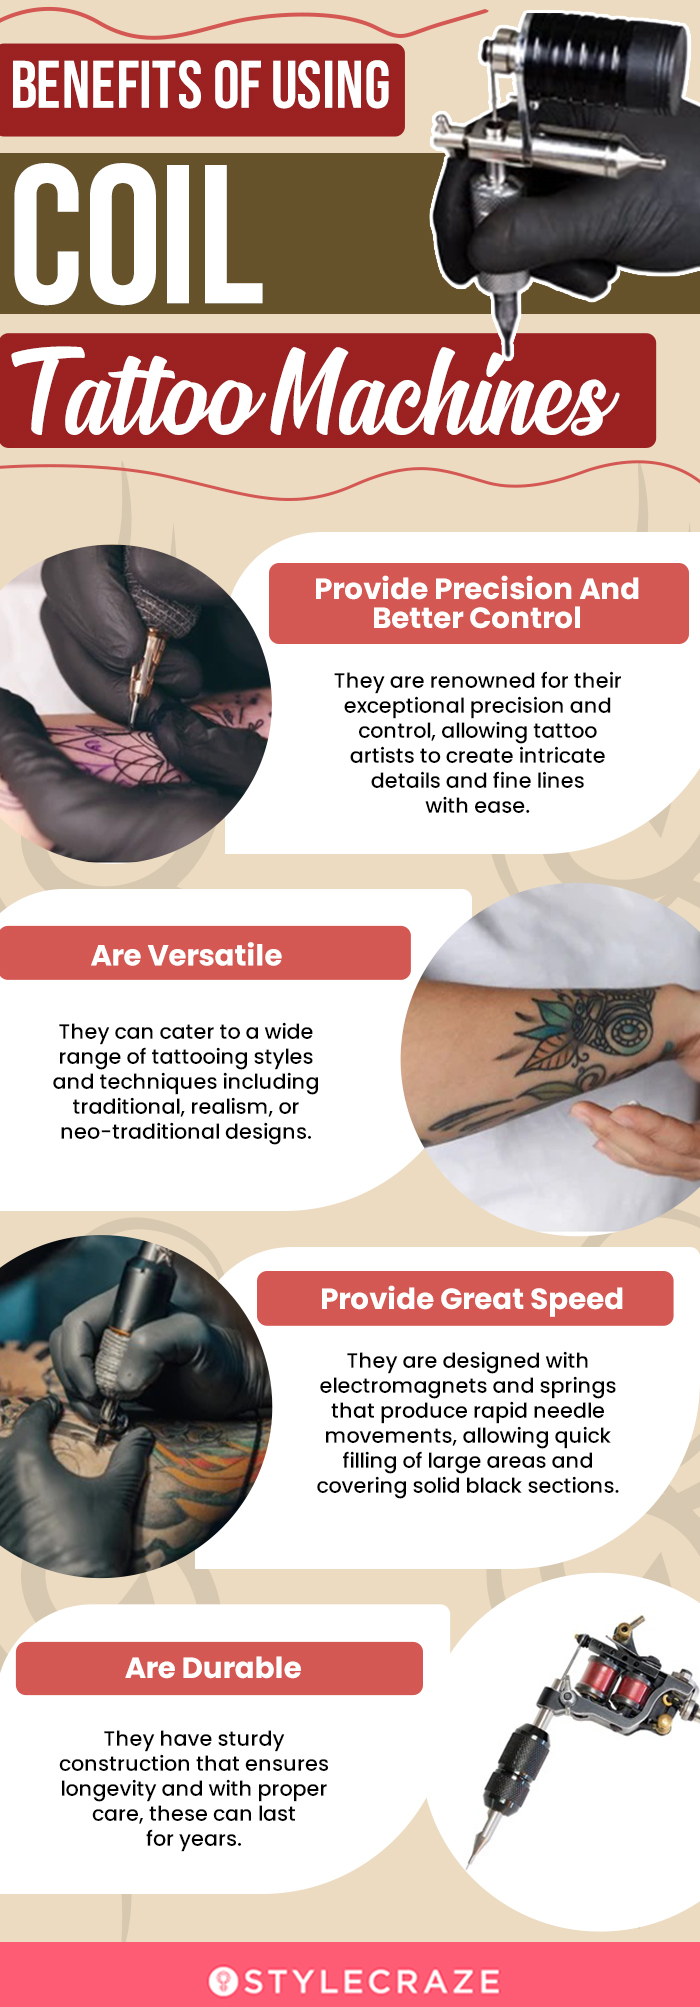 Benefits Of Using Coil Tattoo Machines (infographic)